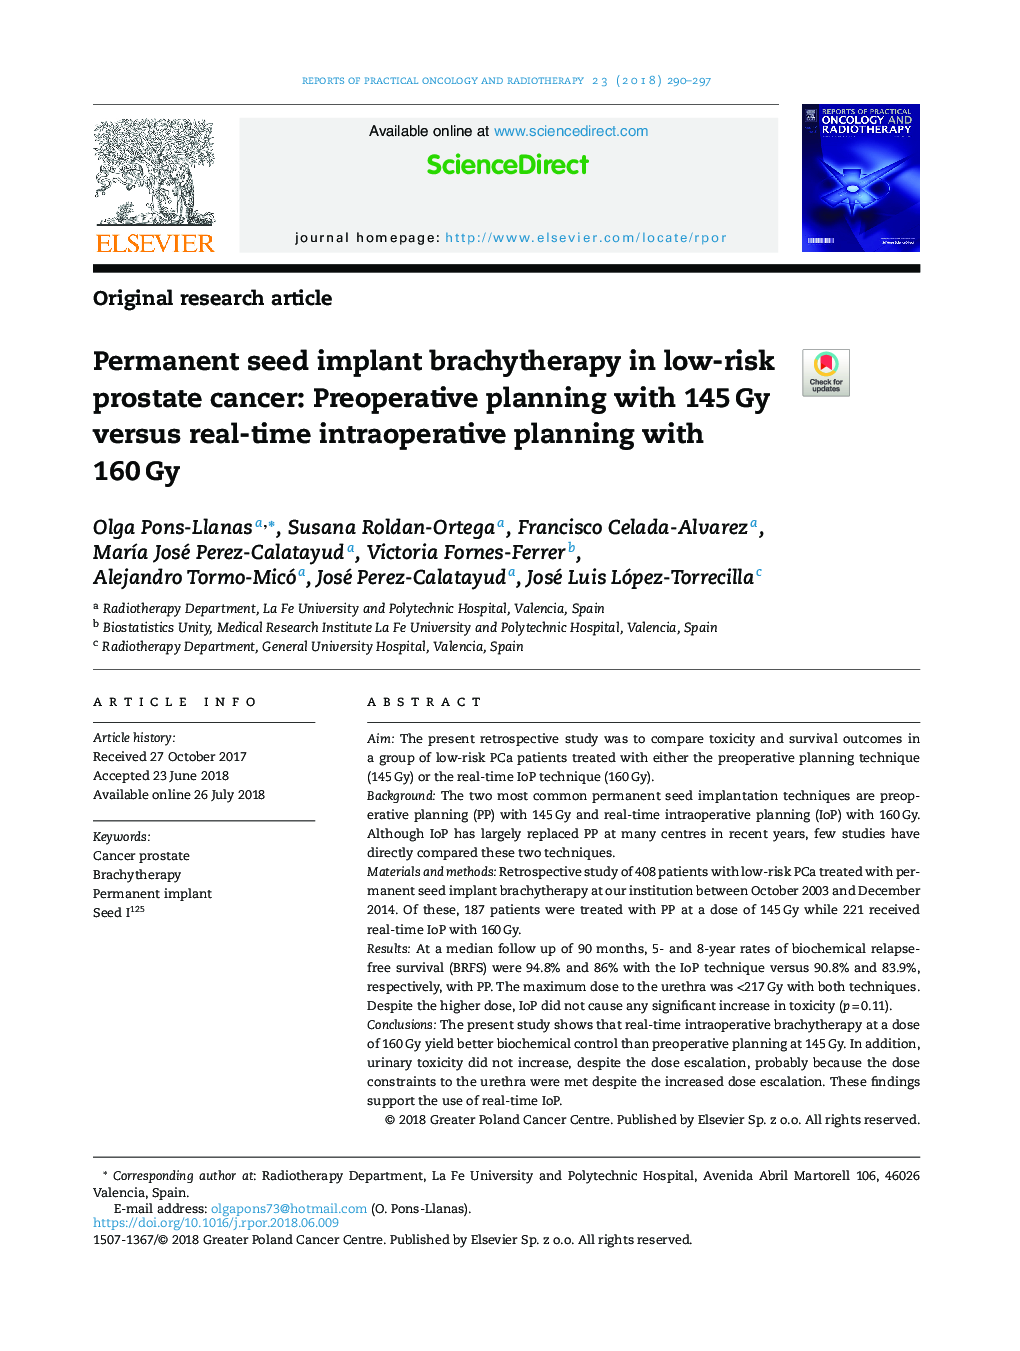 Permanent seed implant brachytherapy in low-risk prostate cancer: Preoperative planning with 145â¯Gy versus real-time intraoperative planning with 160â¯Gy